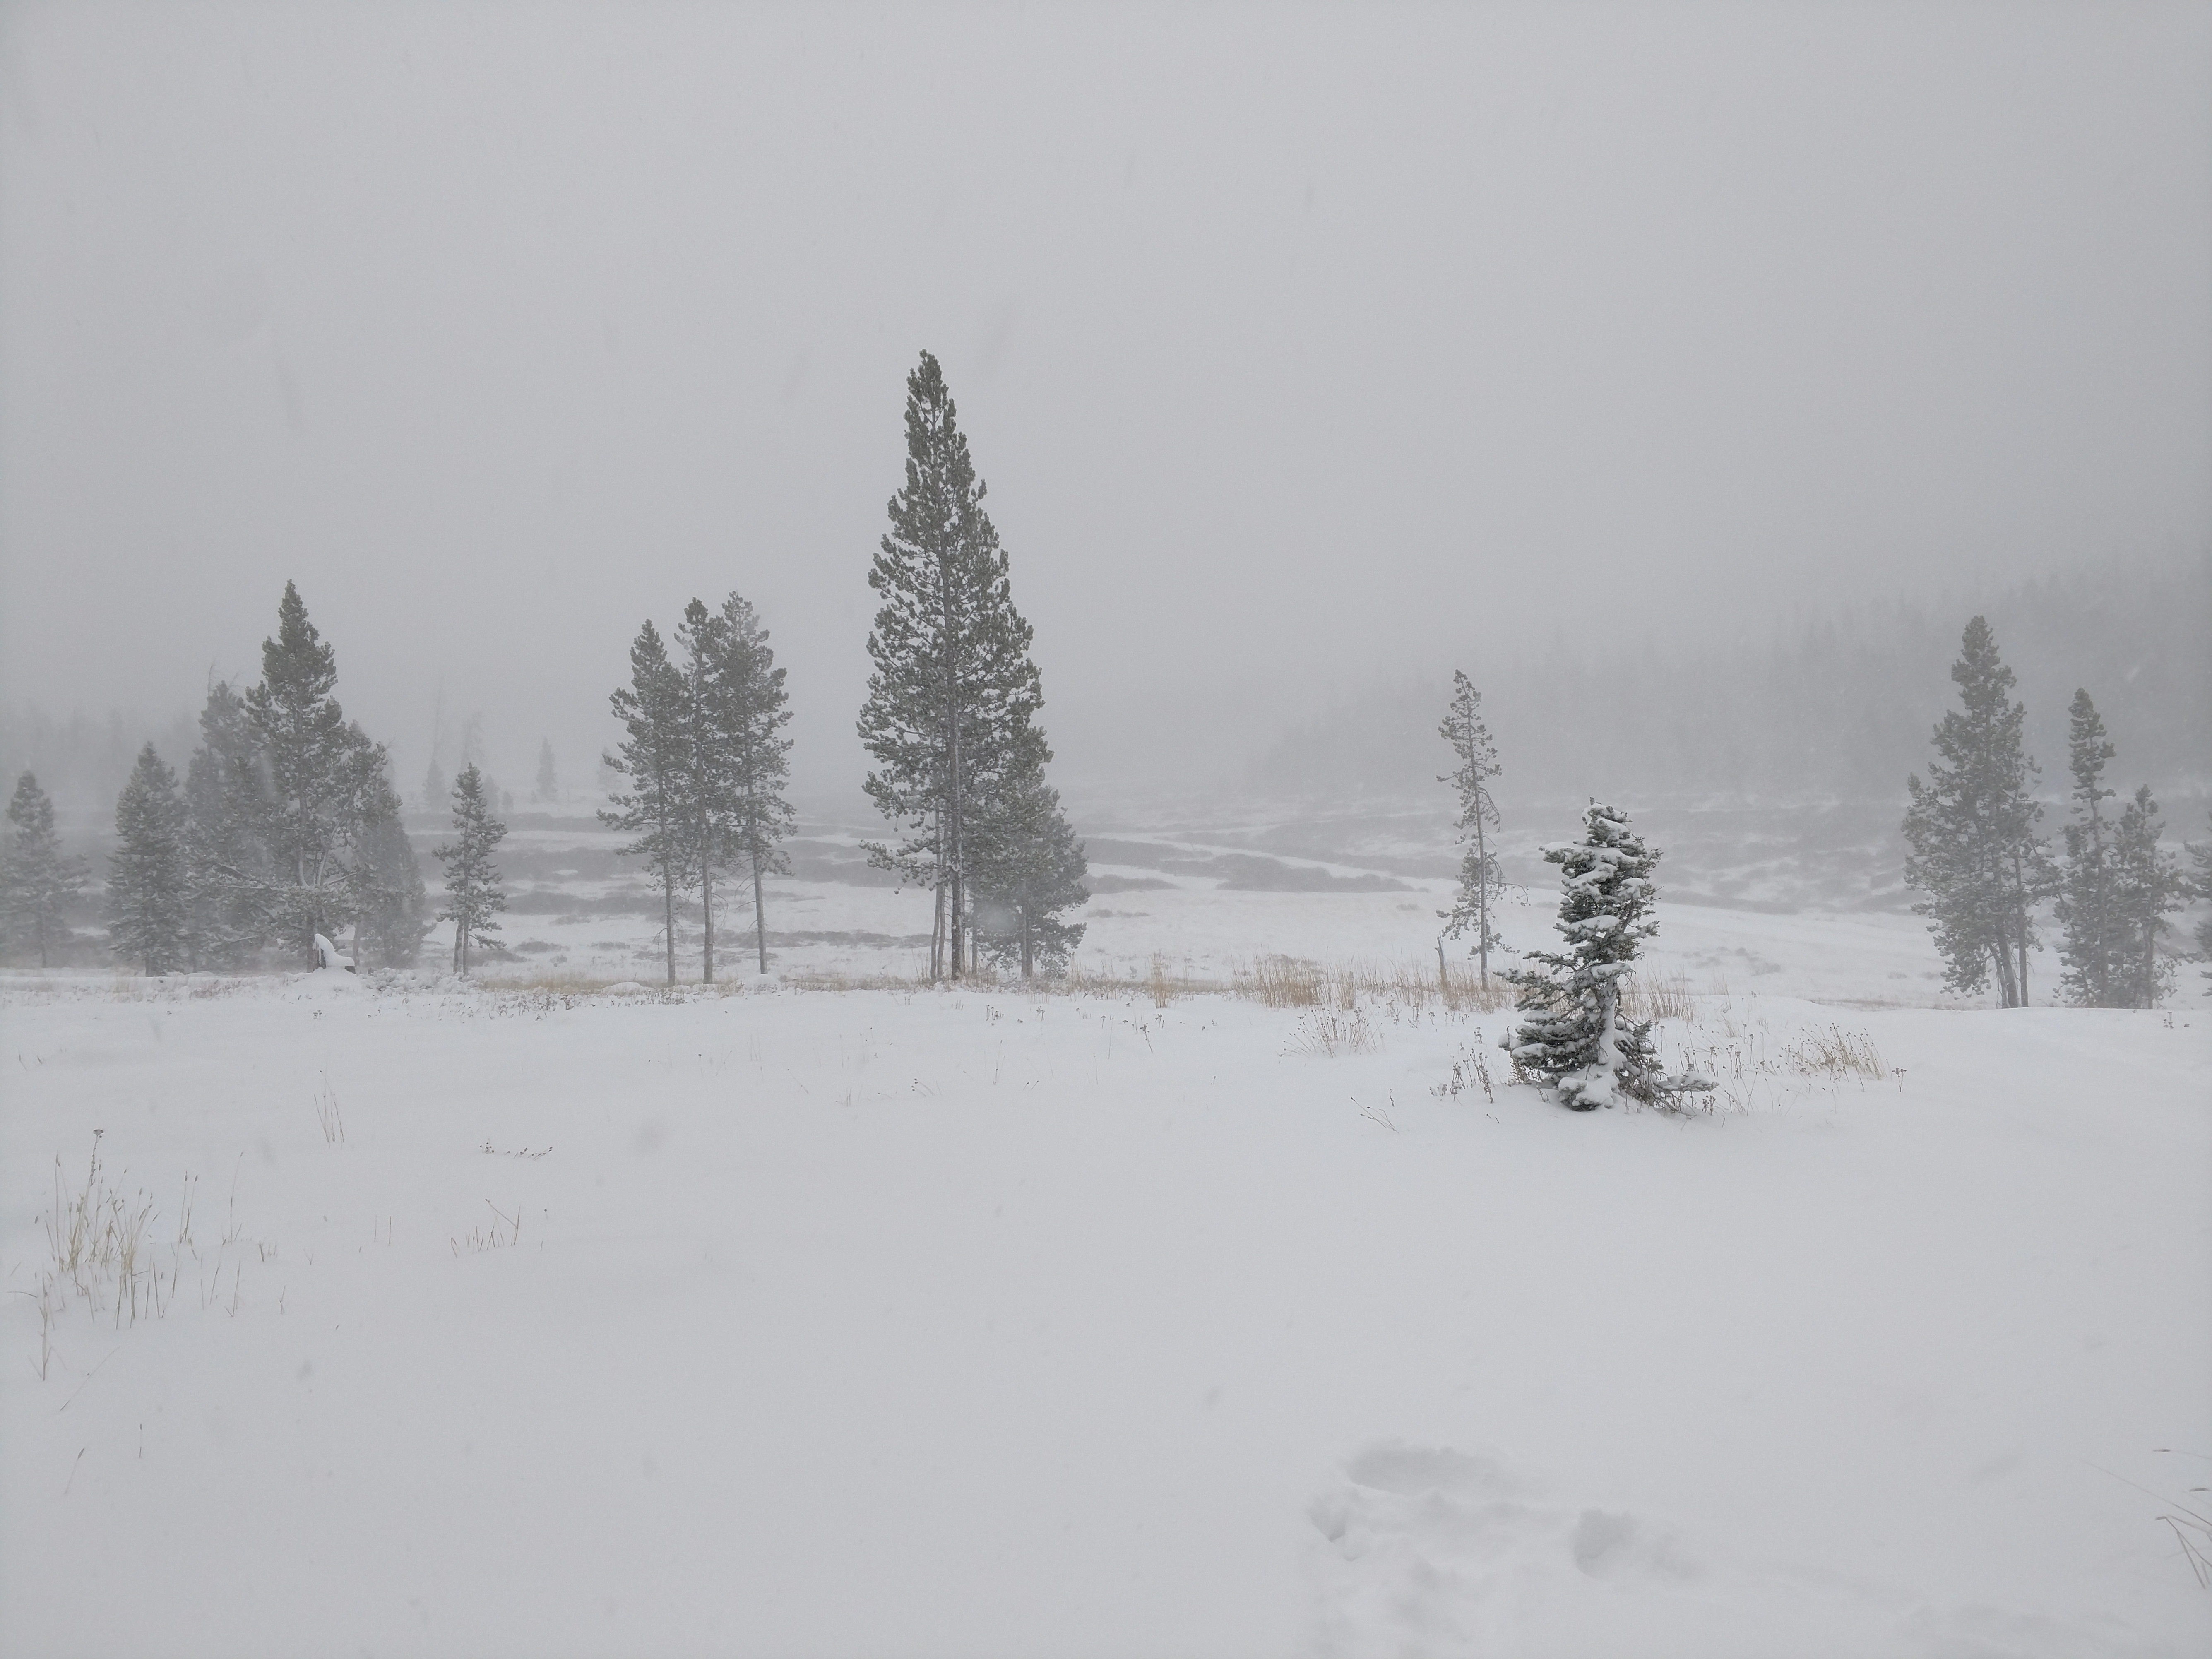 Snowed out in the Colorado Backcountry. We had to scuttle camp yet again.